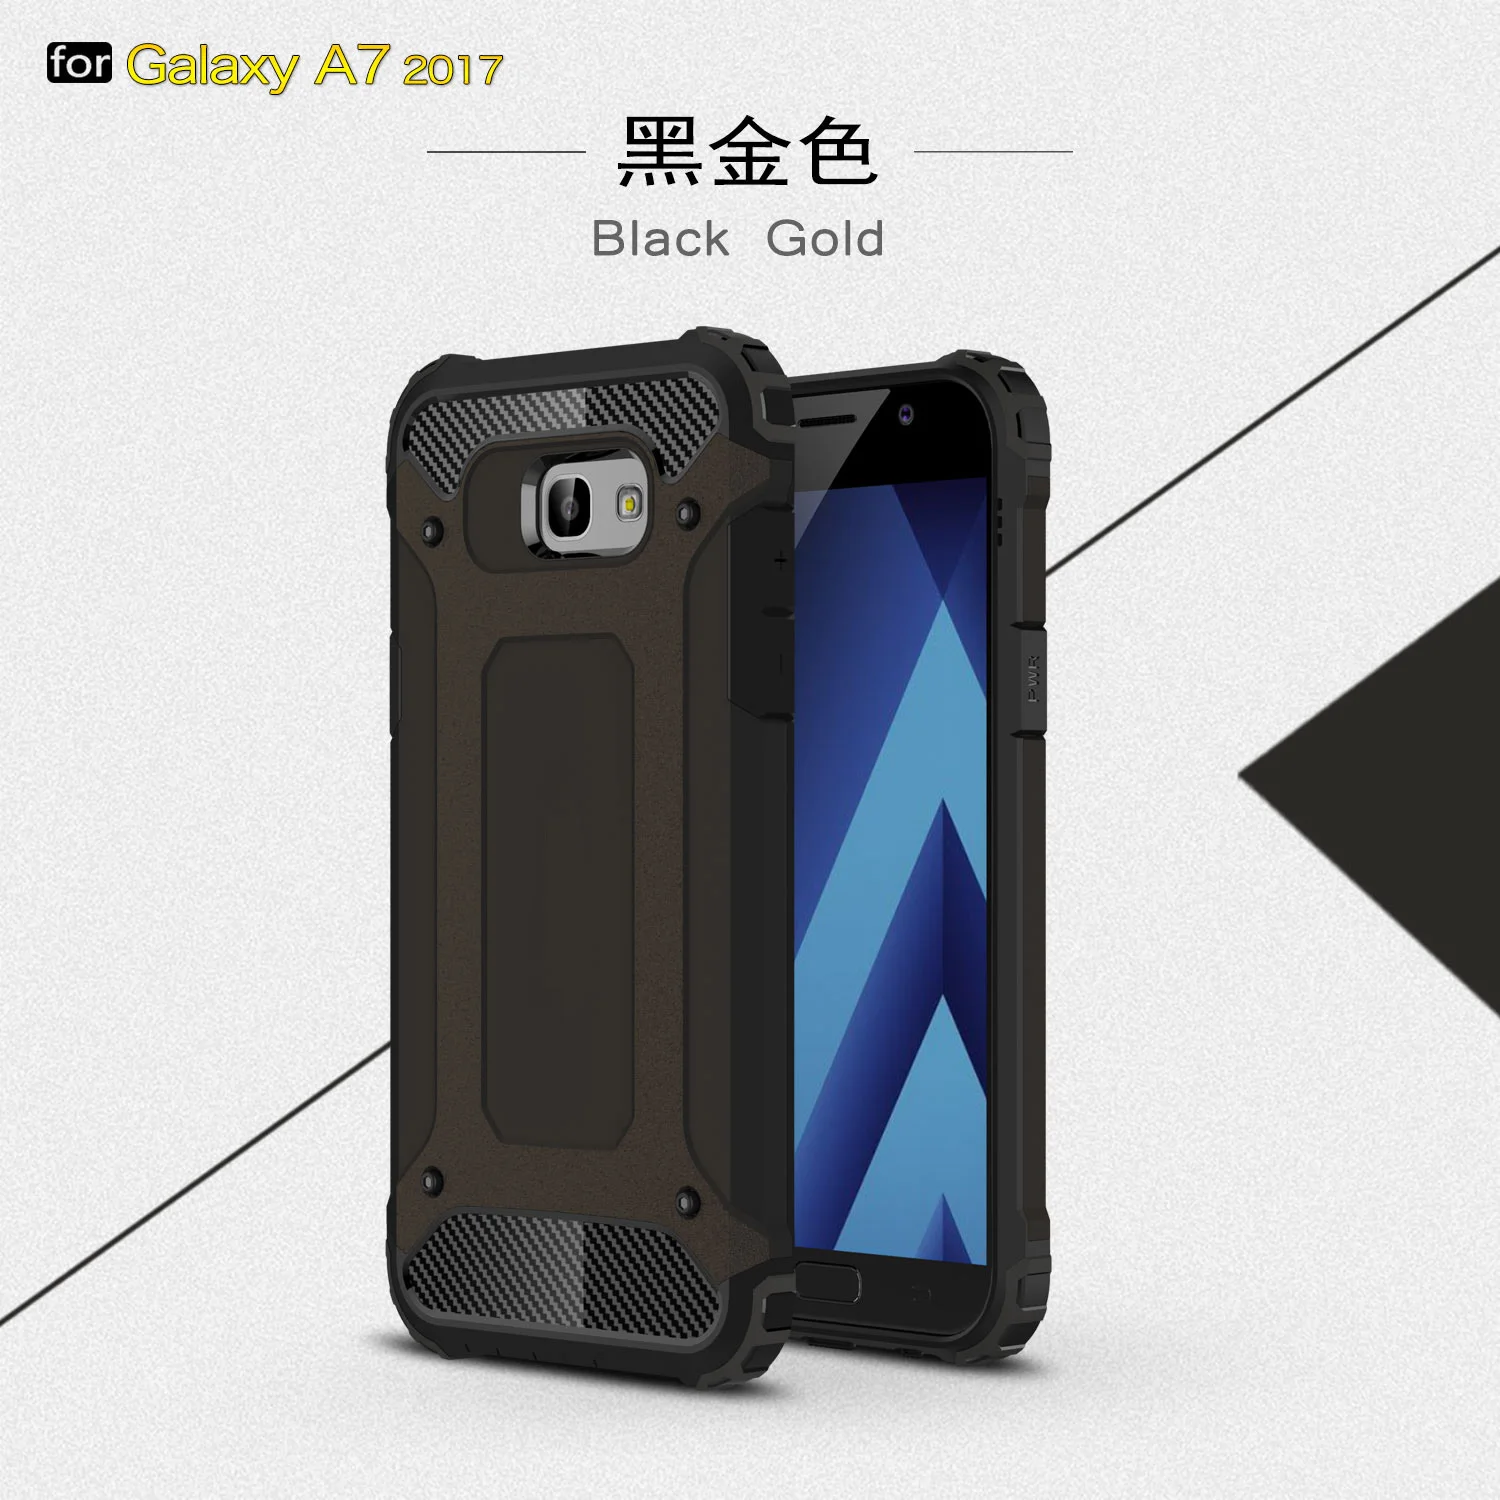 

Case For Samsung Galaxy J7 2017 J 7 J730 SM-J730F J7 Pro 2017 Cover Silicone Rubber Armor Protective Coque For Samsung J7 2017